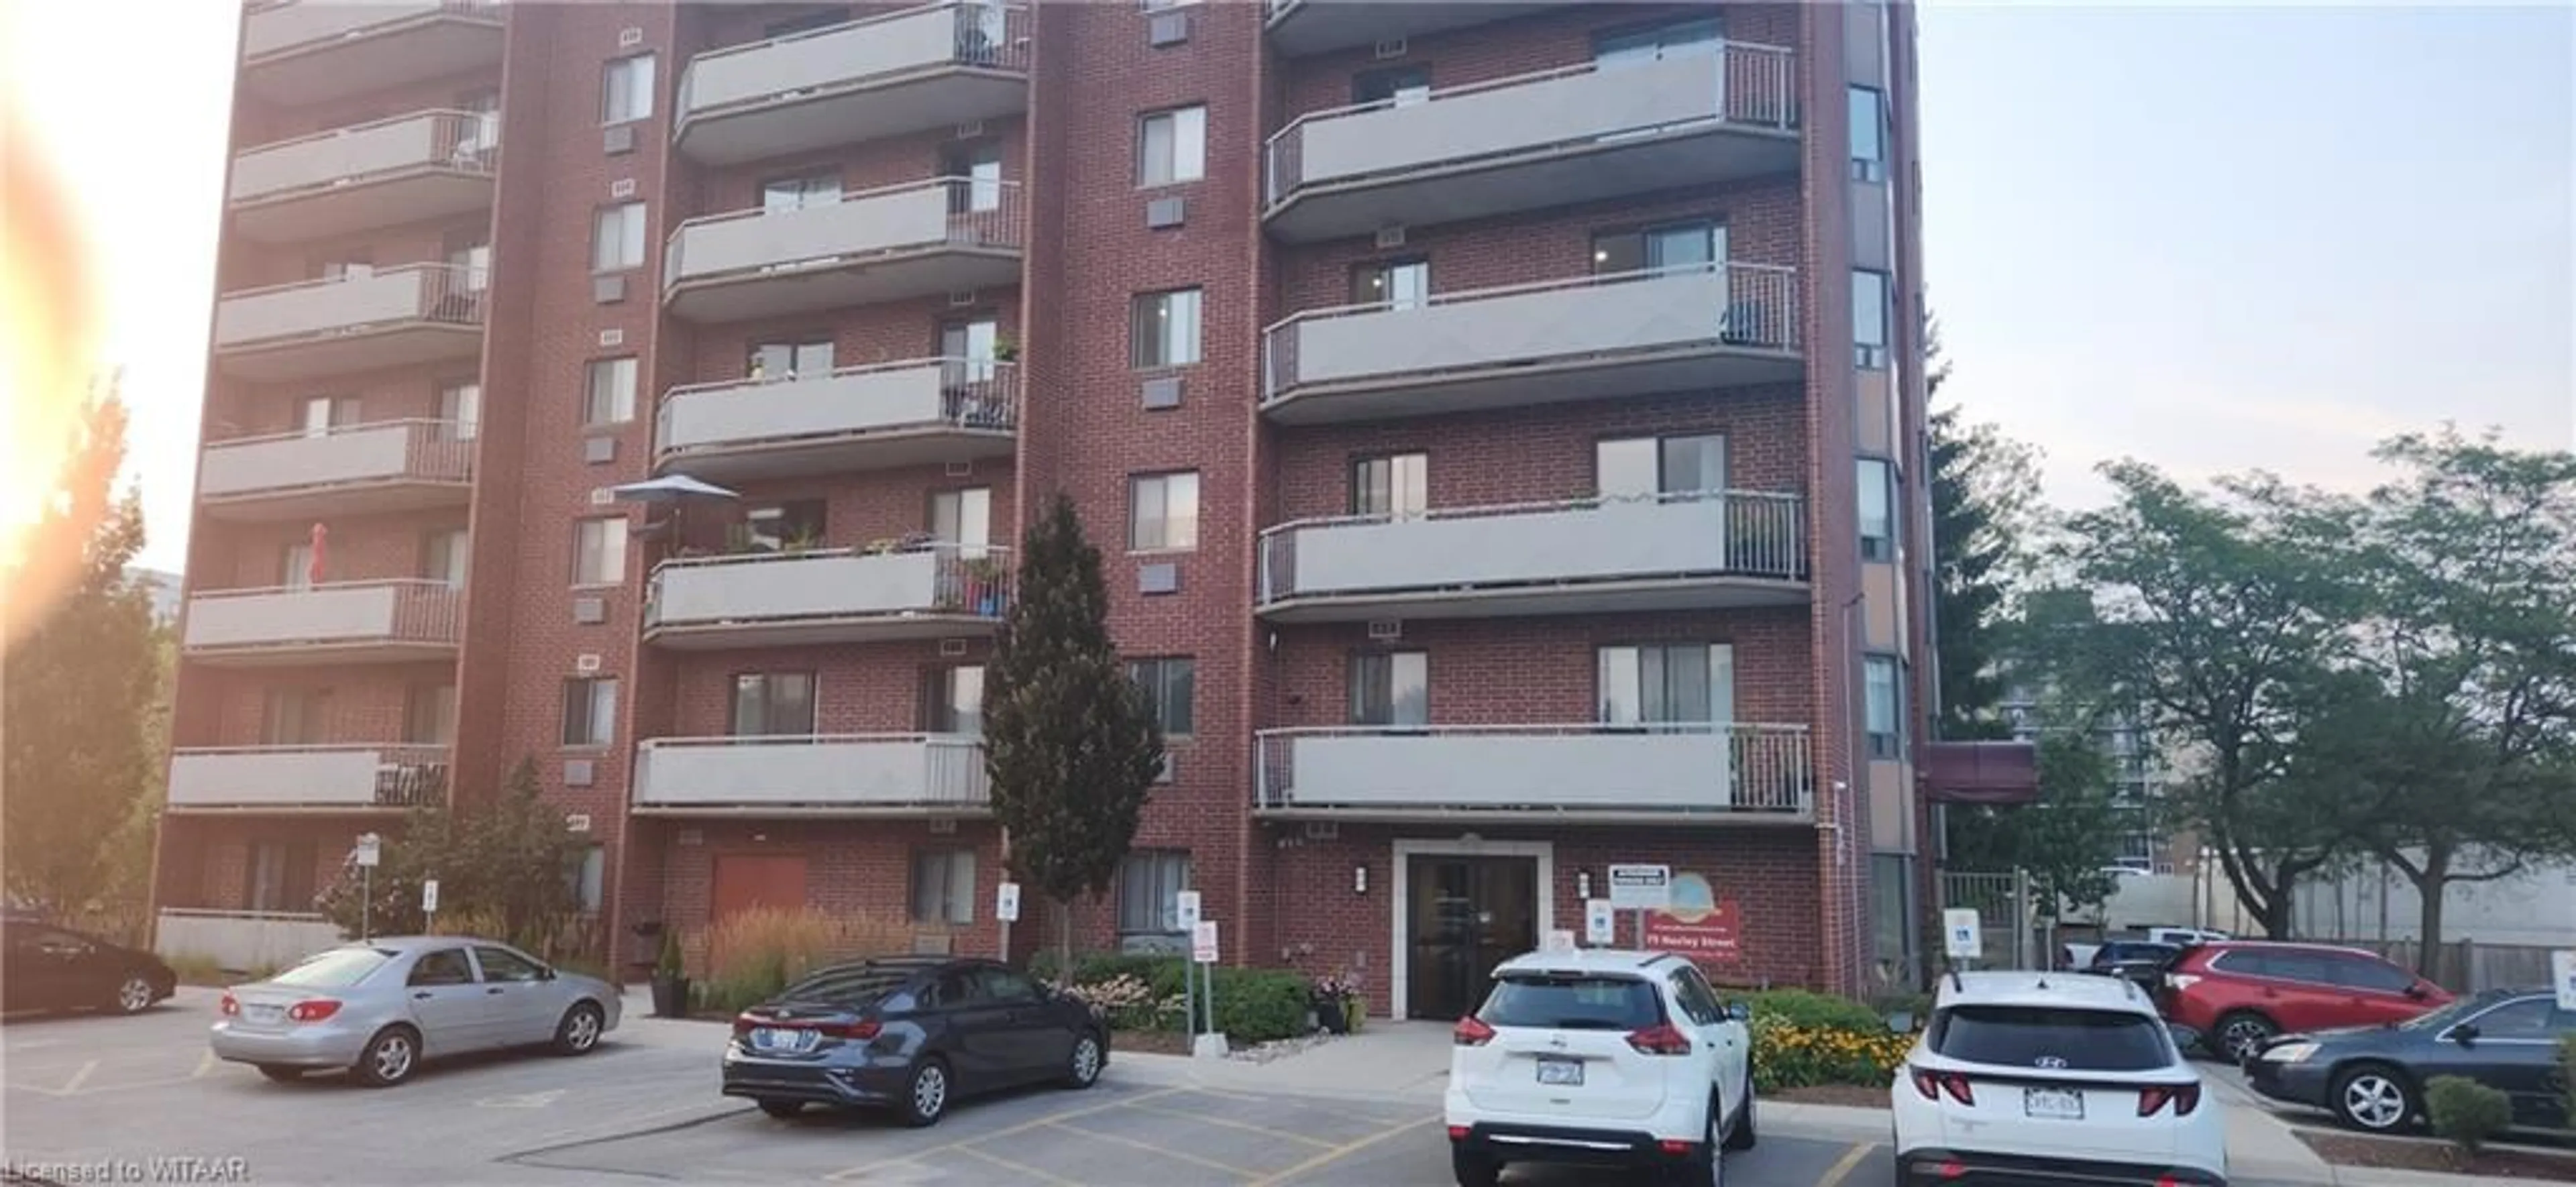 A pic from exterior of the house or condo for 75 Huxley St #402, London Ontario N6J 4W7